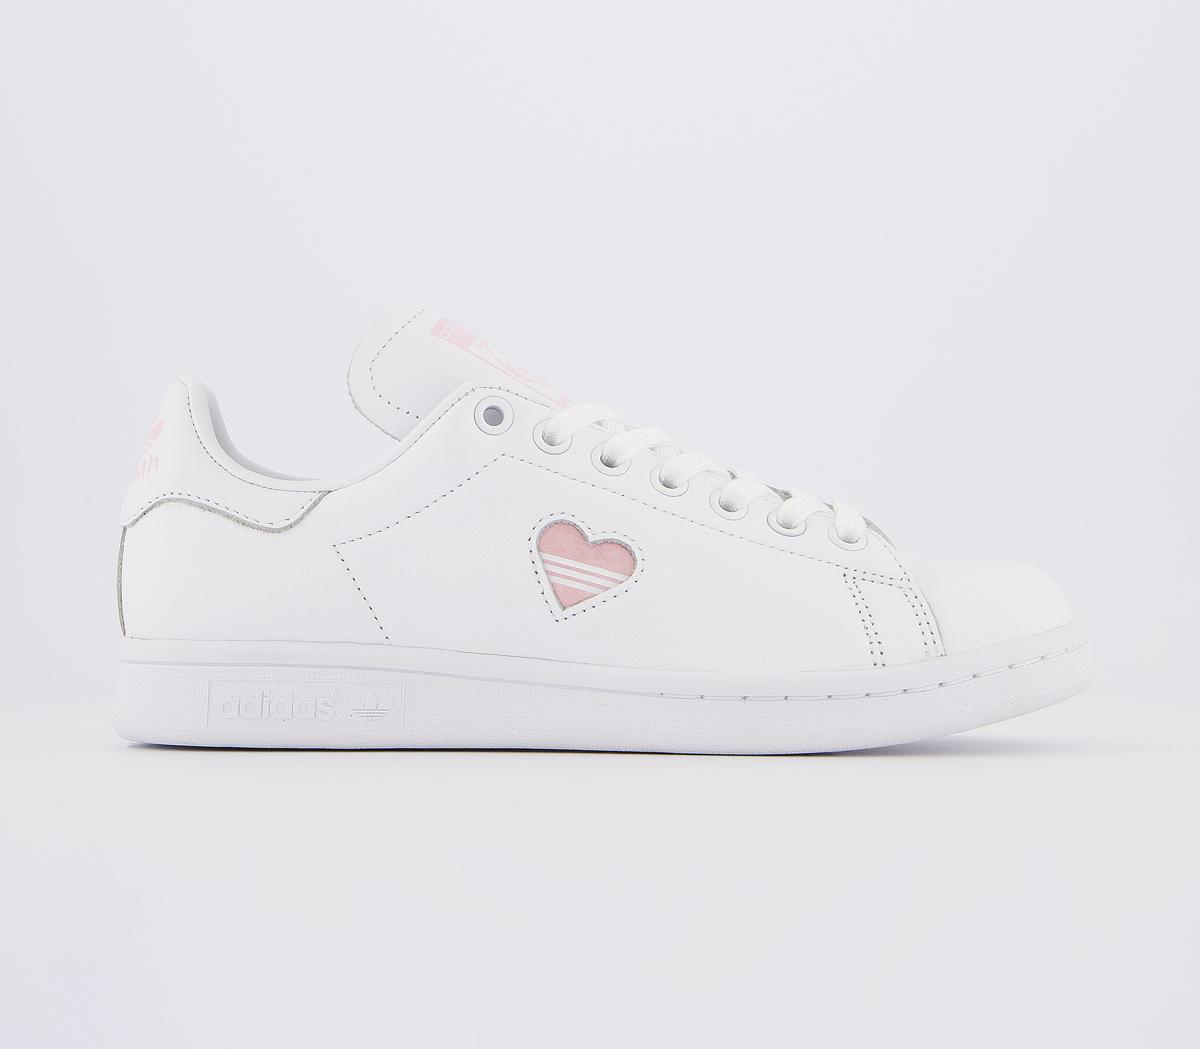 stan smith pink